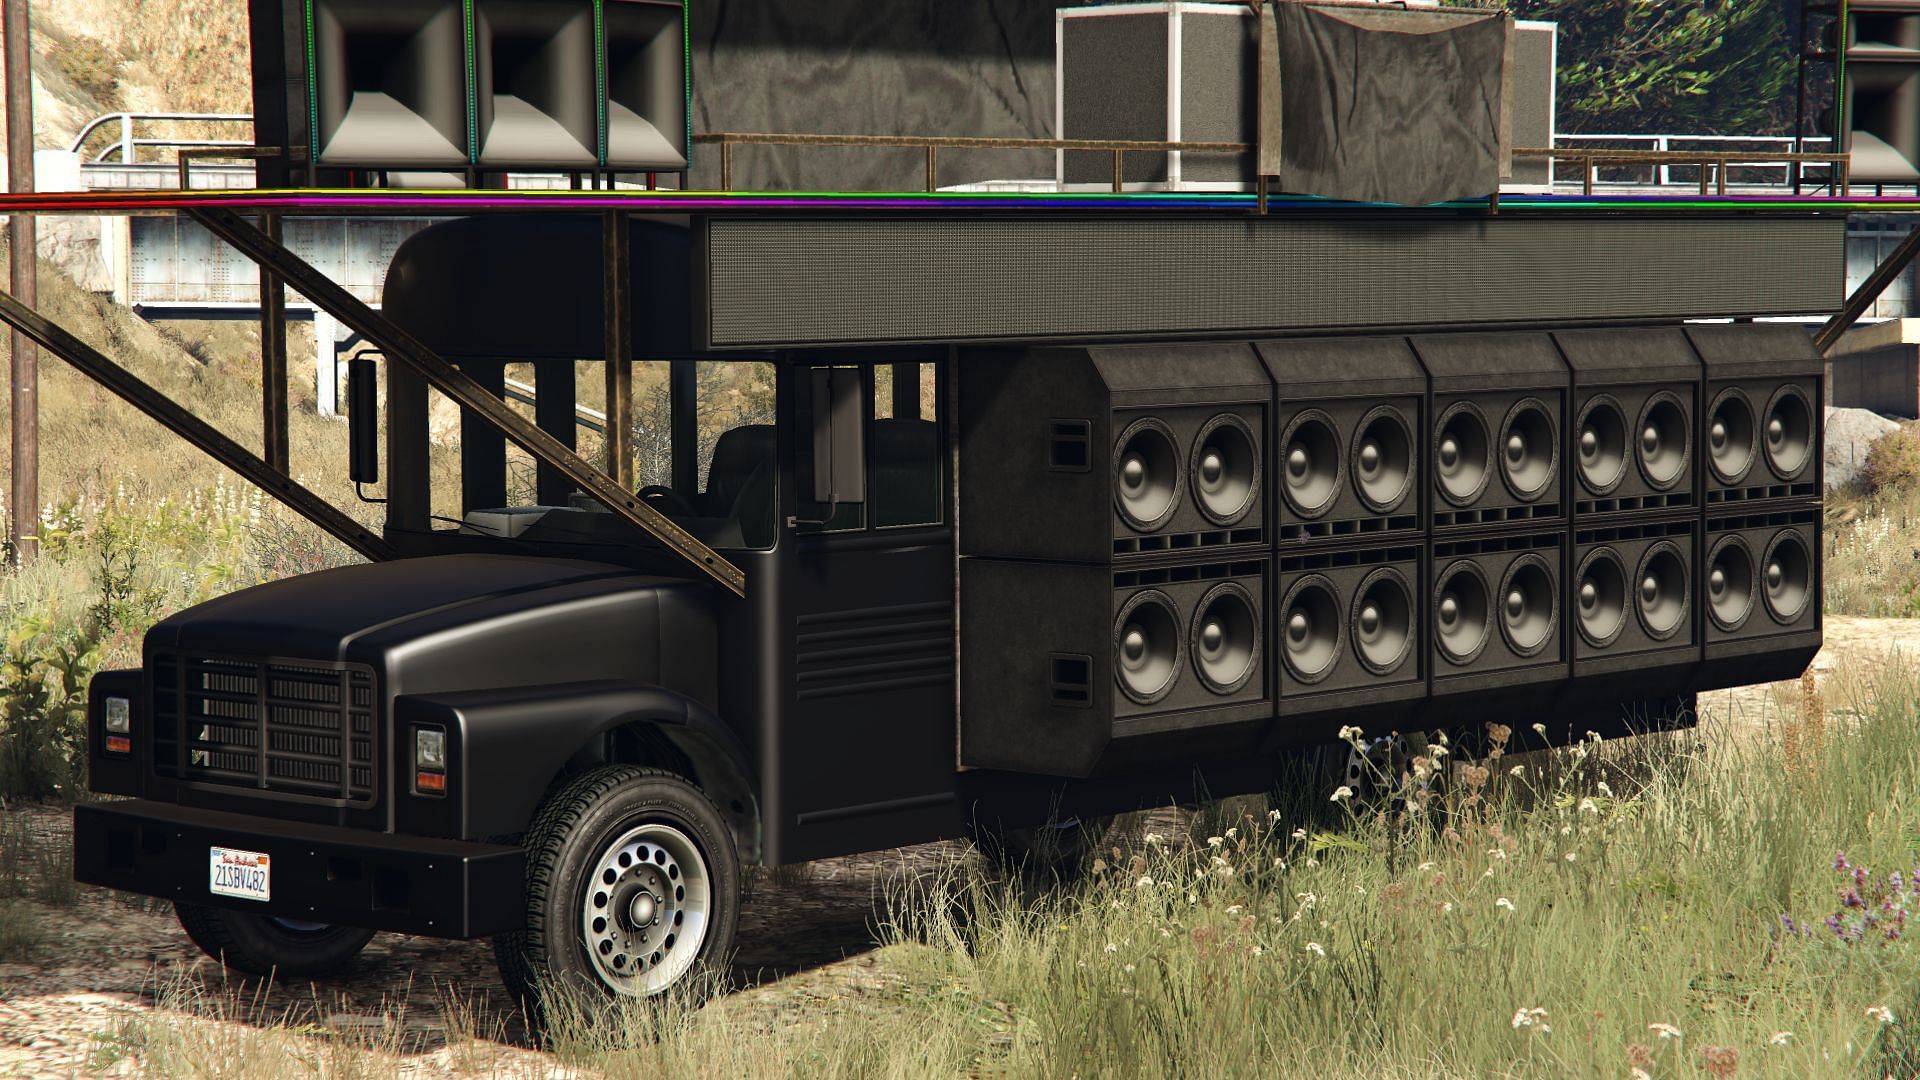 The Festival Bus mission for Nightclubs is a good example of boring driving (Image via Rockstar Games)